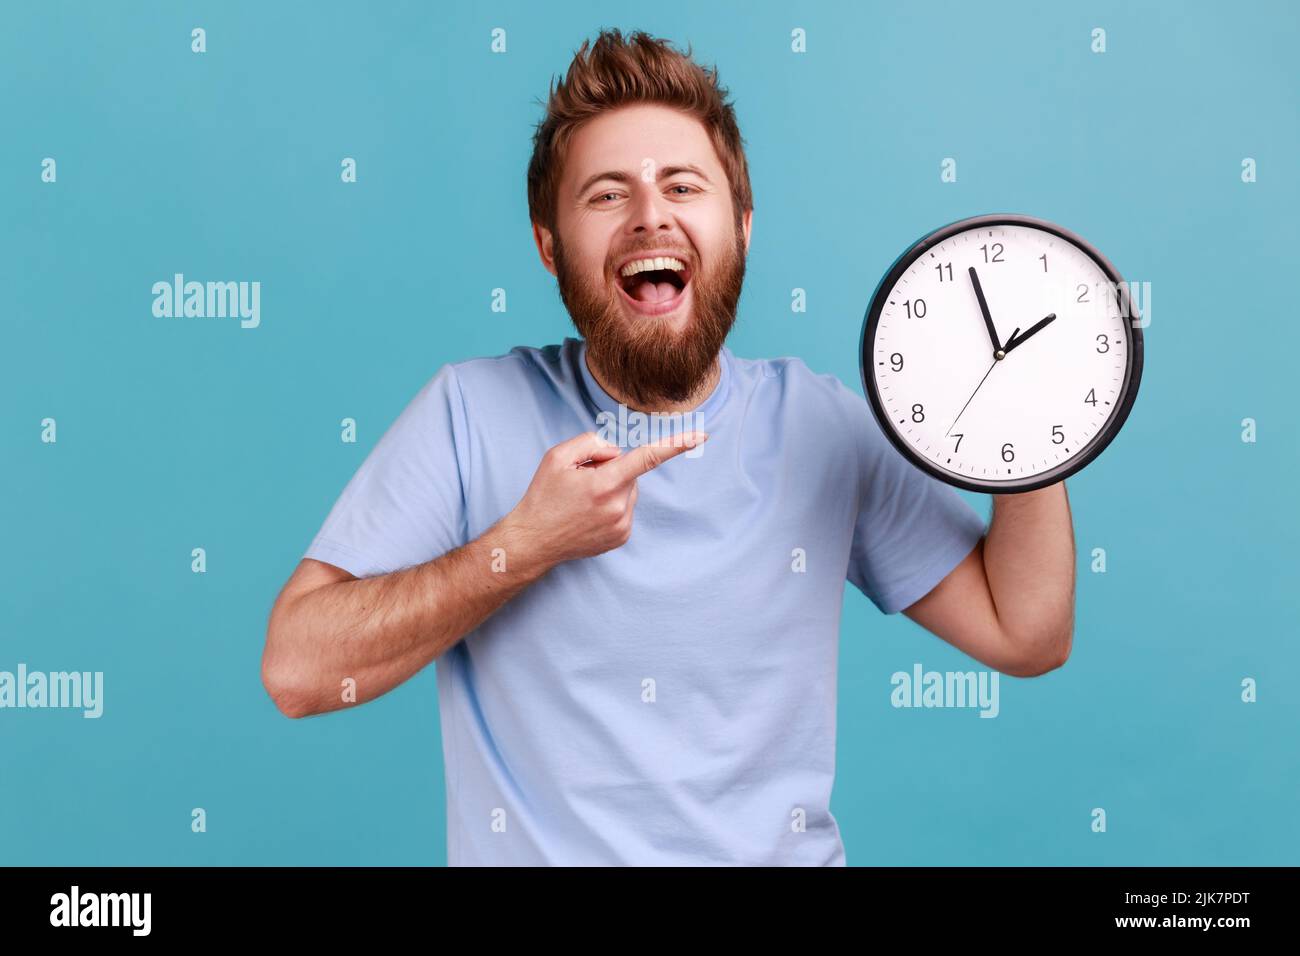 Portrait of happy positive handsome bearded man pointing at wall clock with finger, looking at camera with toothy smile, laughing. Indoor studio shot isolated on blue background. Stock Photo